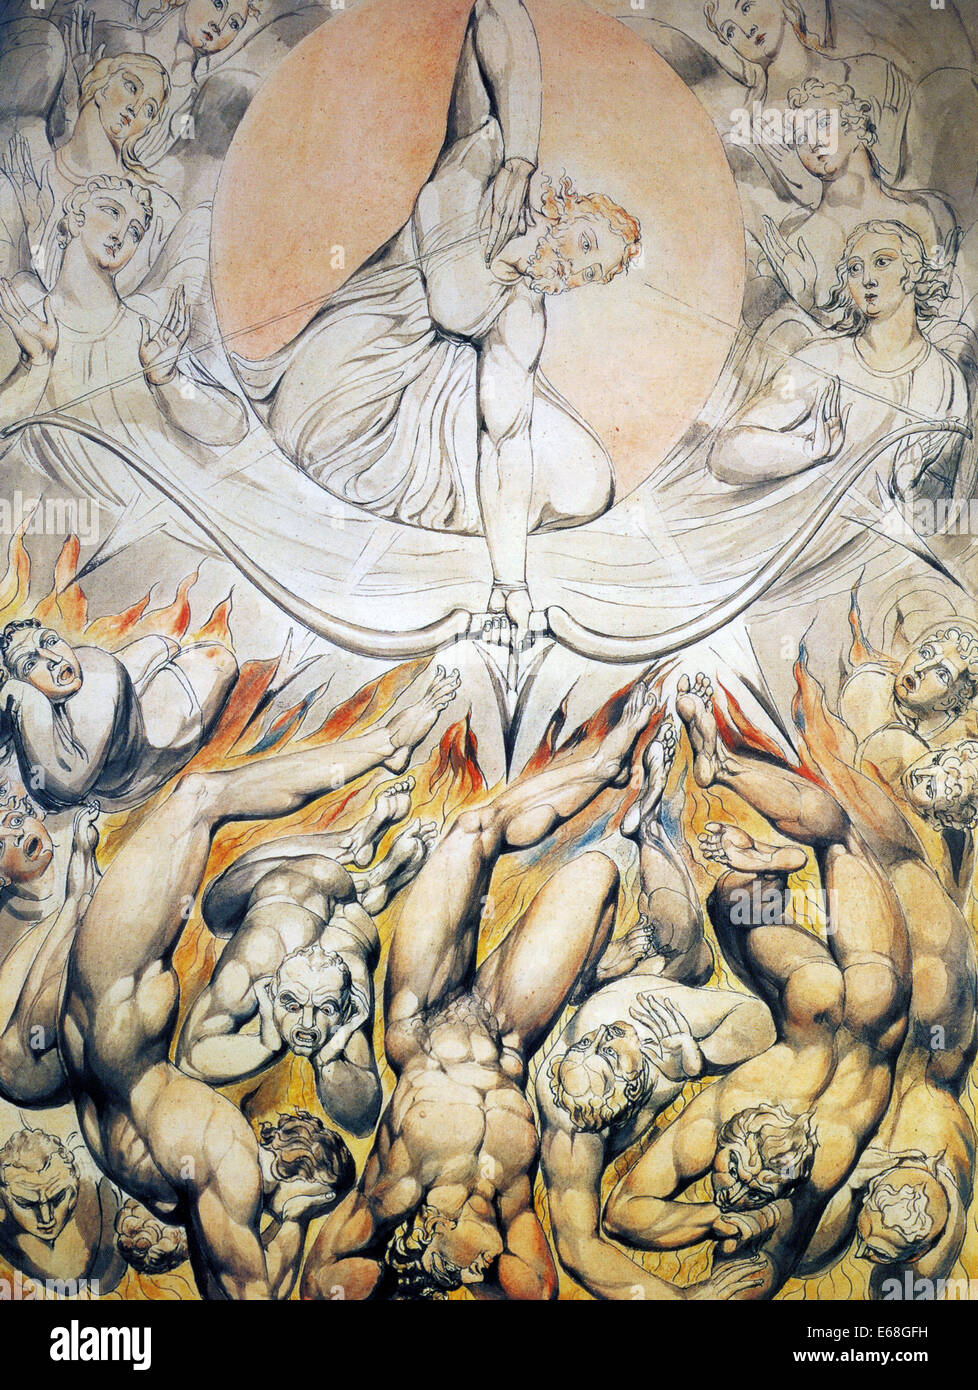 WILLIAM BLAKE (1757-1827)  English artist. Illustration for Milton's Paradise Lost Rebel Angels being out of Heaven (1808) Stock Photo